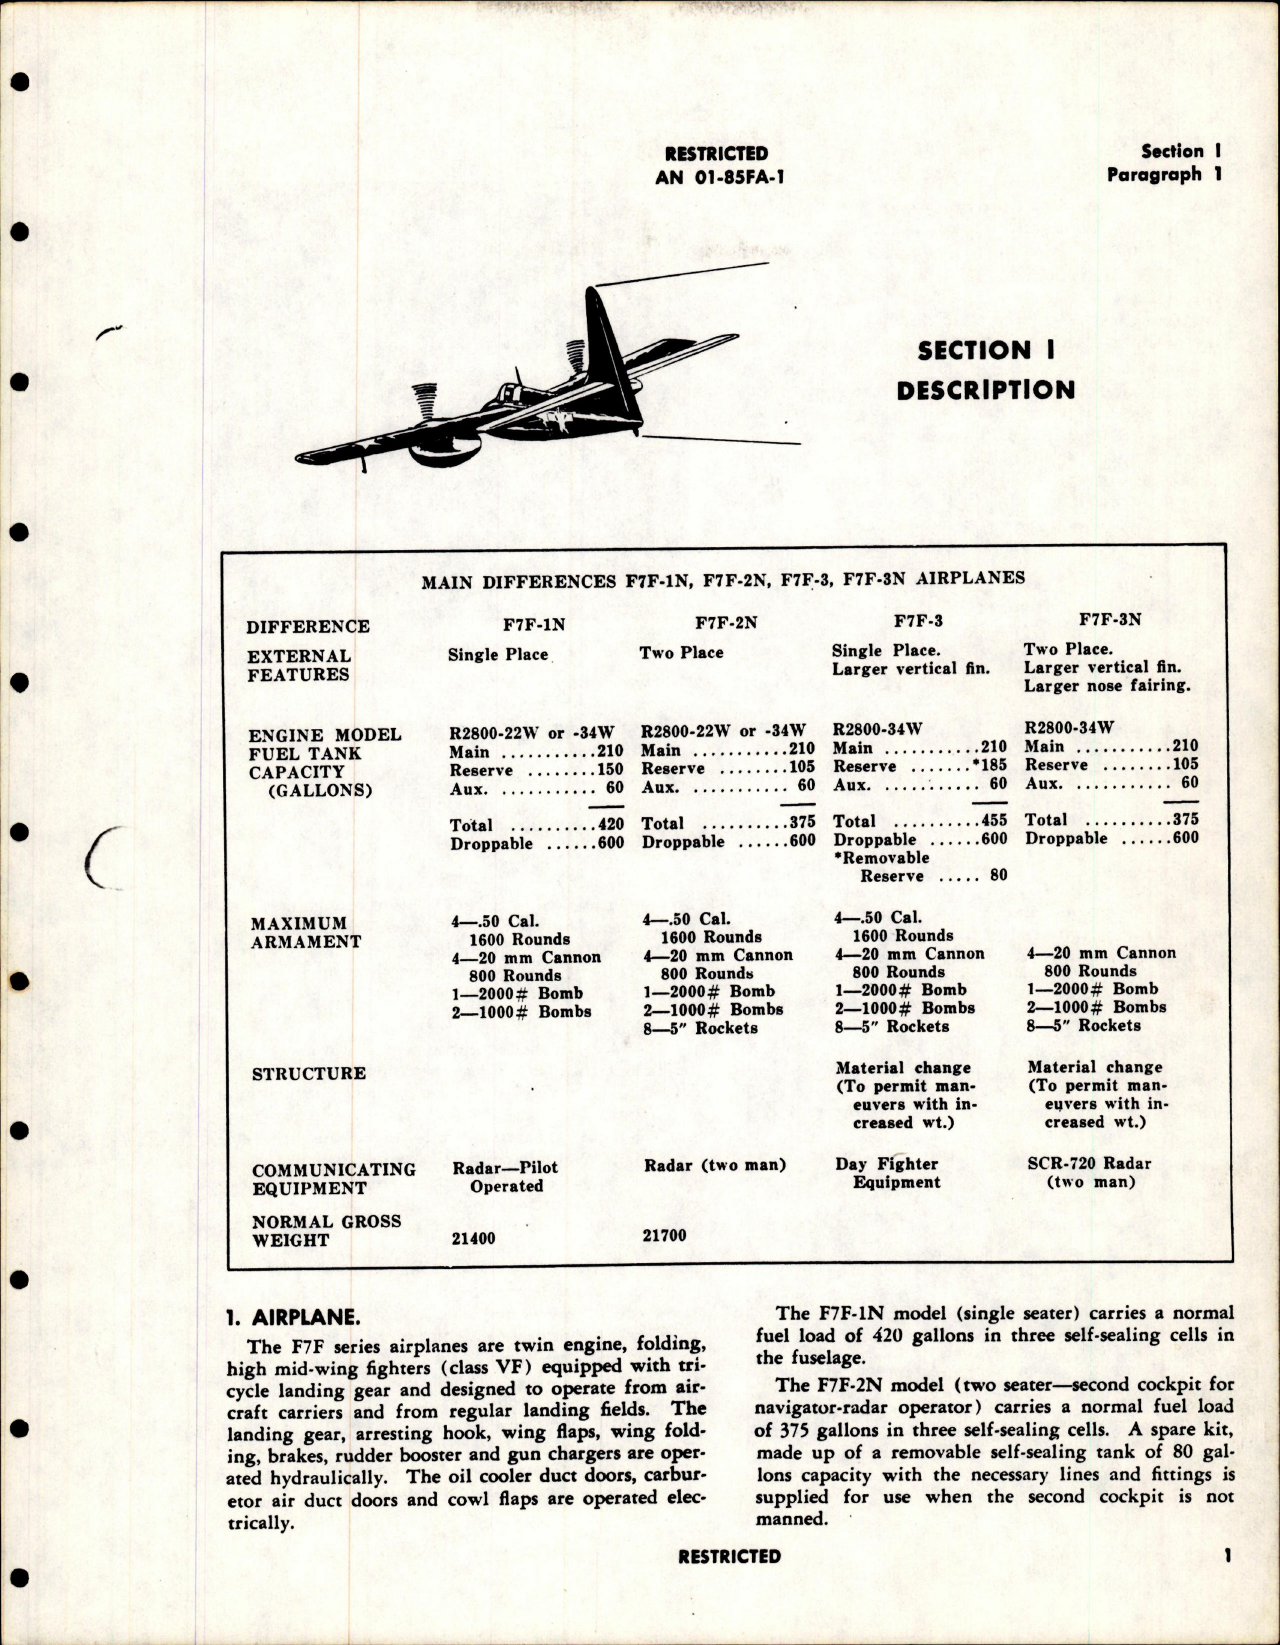 Sample page 7 from AirCorps Library document: Pilot's Handbook for F7F-1N, F7F-2N, F7F-3, and F7F-3N